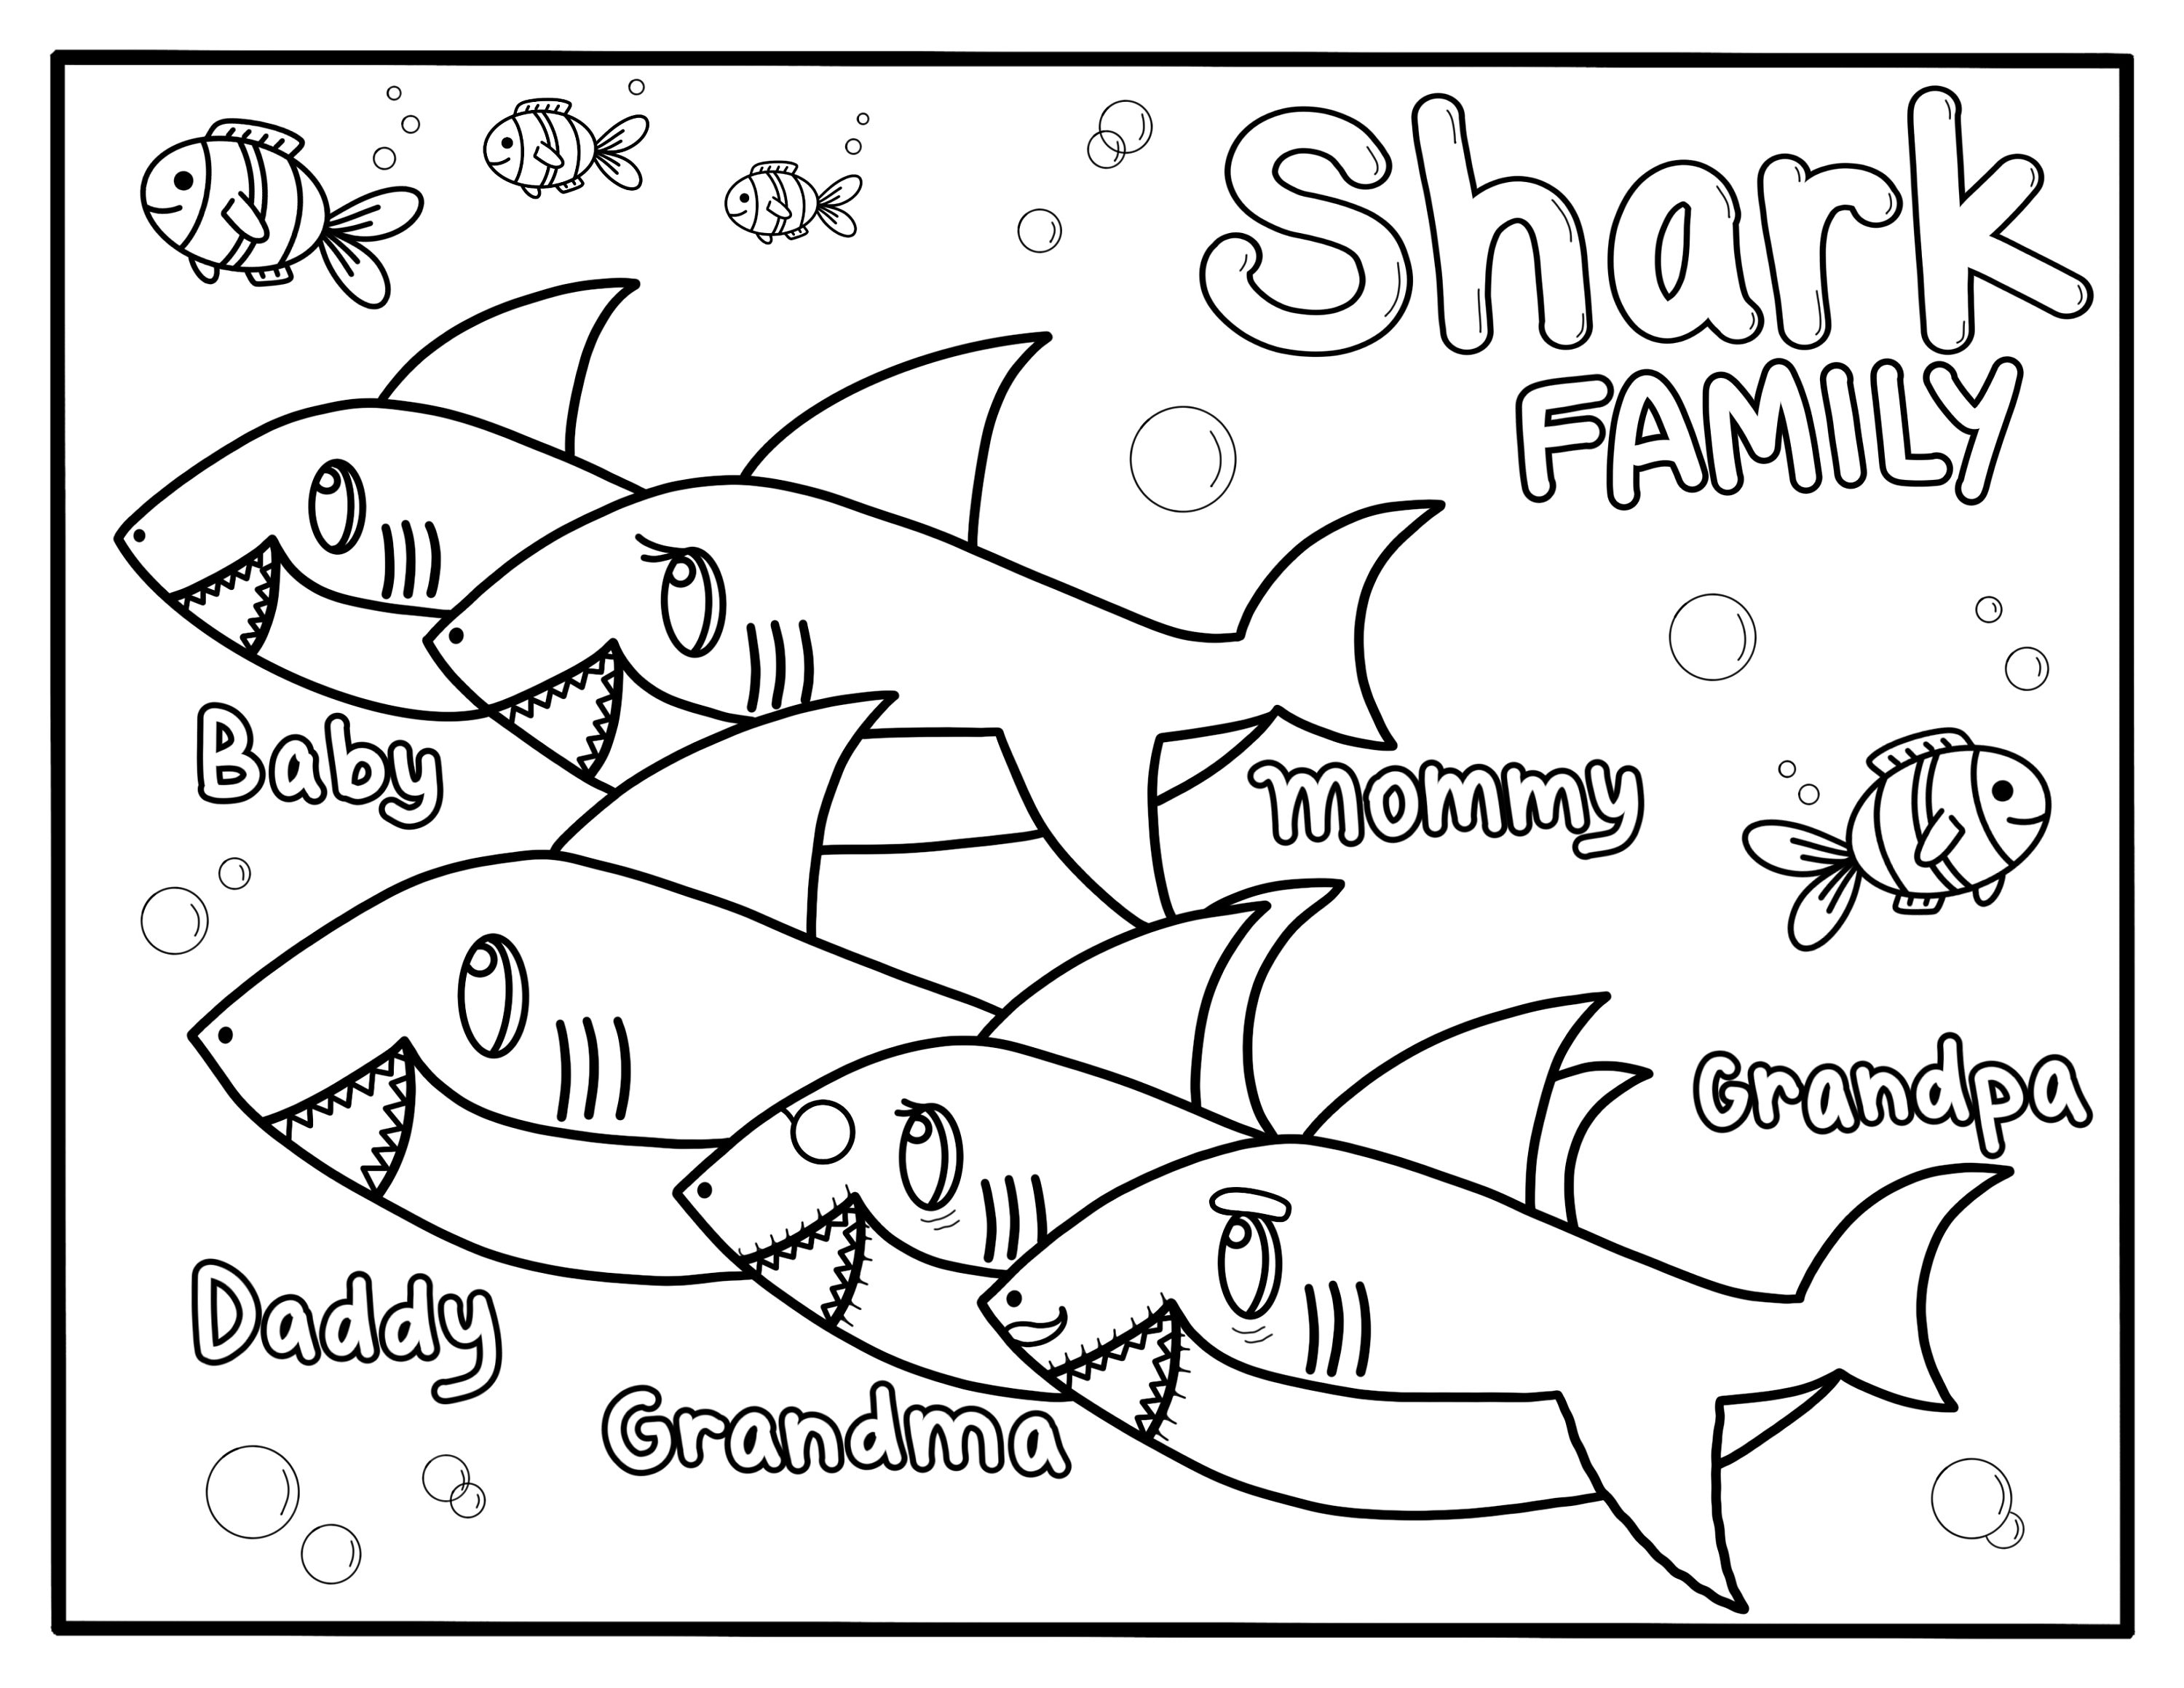 Baby Shark Family coloring page   Etsy